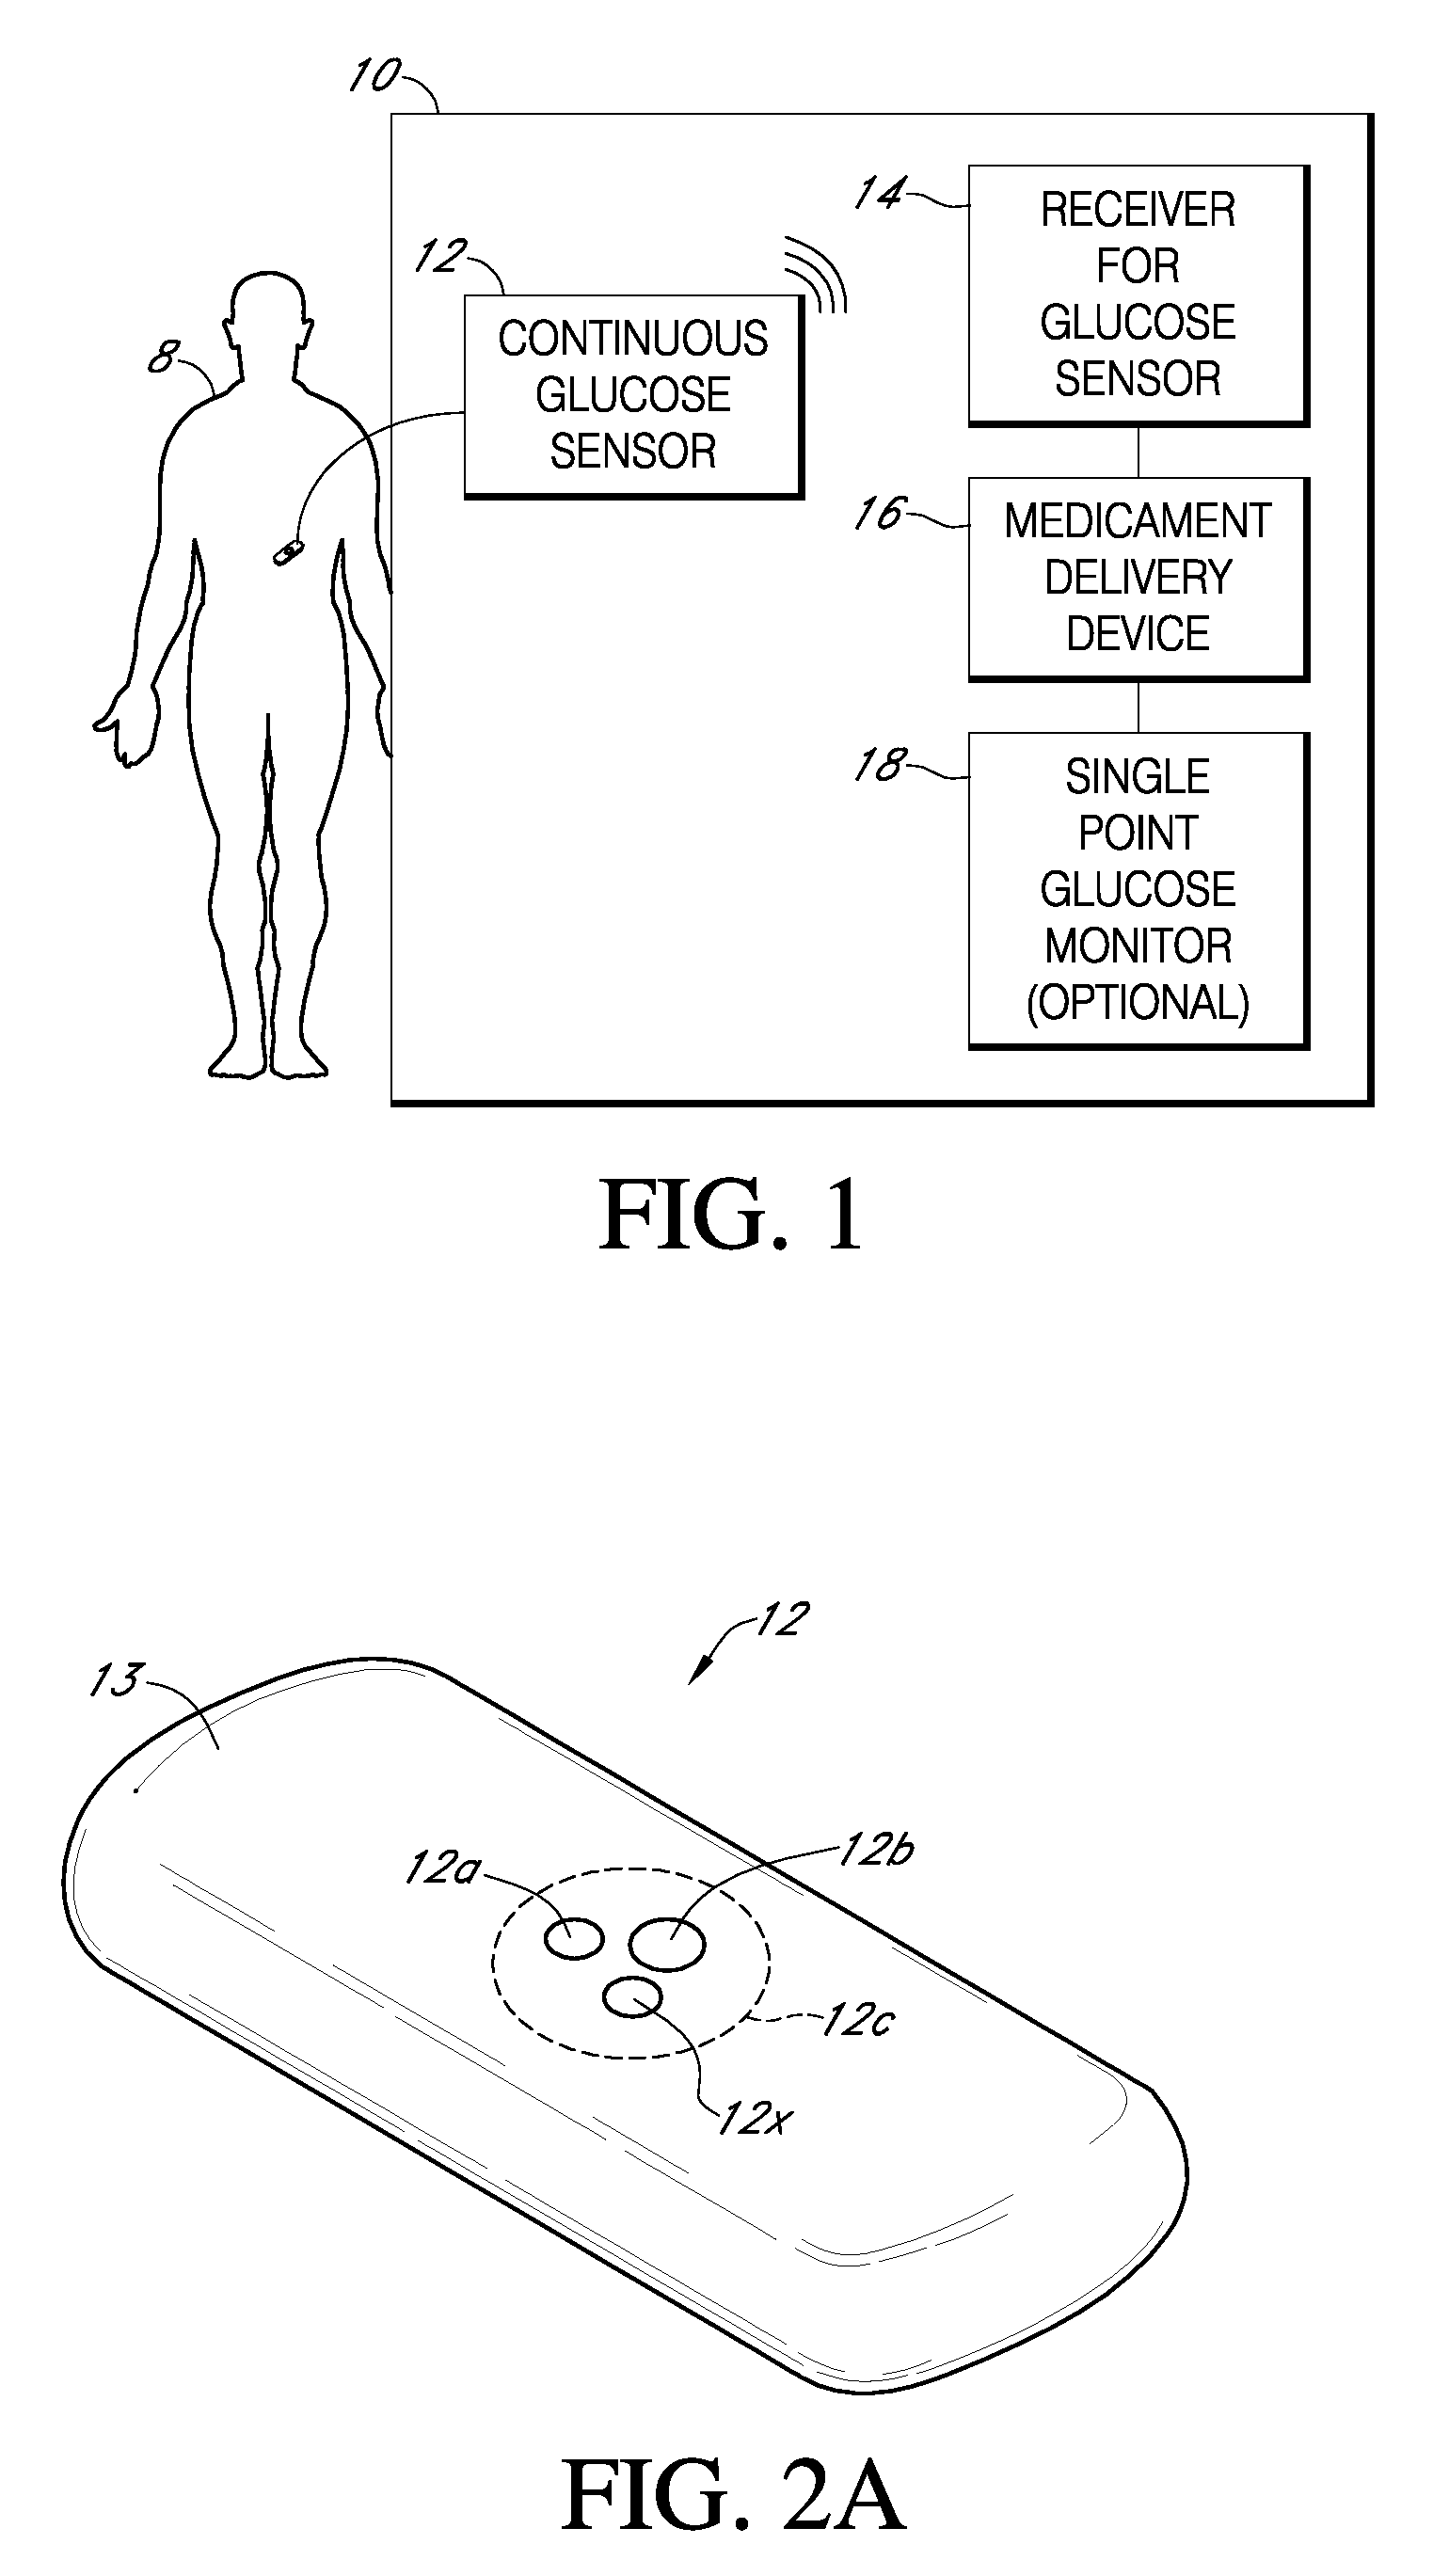 Integrated medicament delivery device for use with continuous analyte sensor